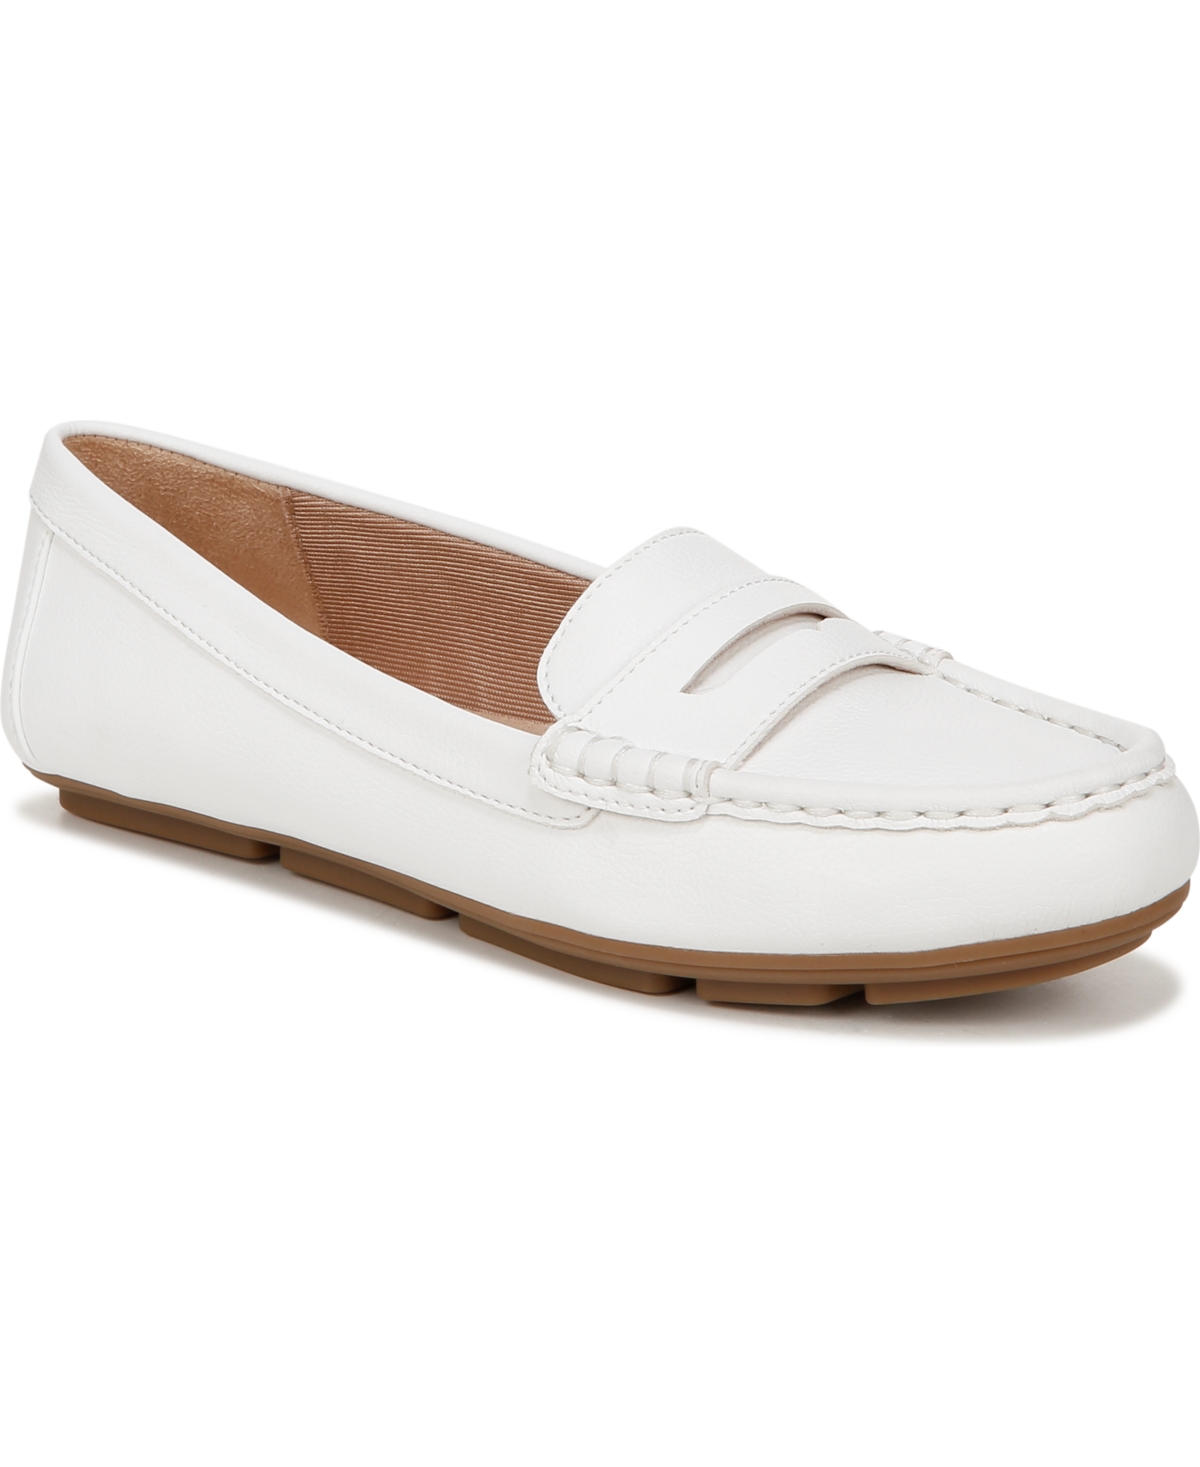 Lifestride Riviera Slip-on Loafers In Bright White Faux Leather